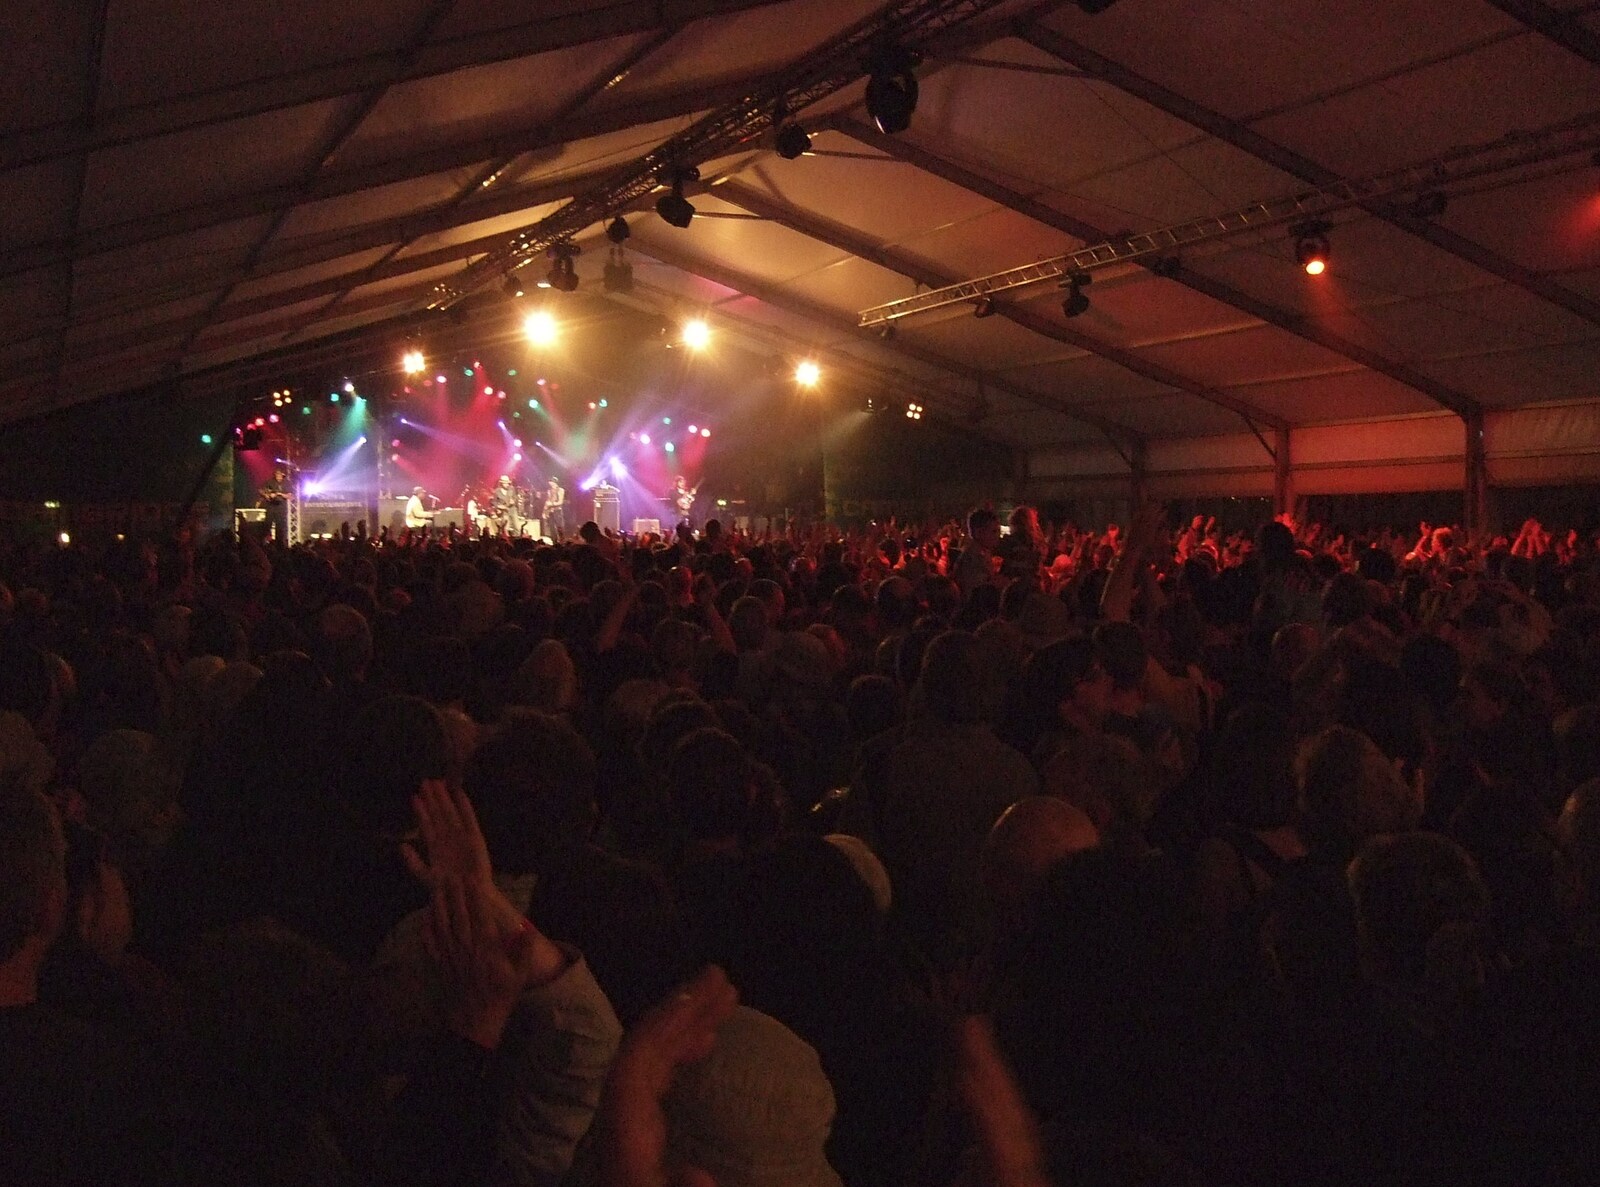 The crowd in the main stage tent from The Cambridge Folk Festival, Cherry Hinton Hall, Cambridge - 1st August 2009